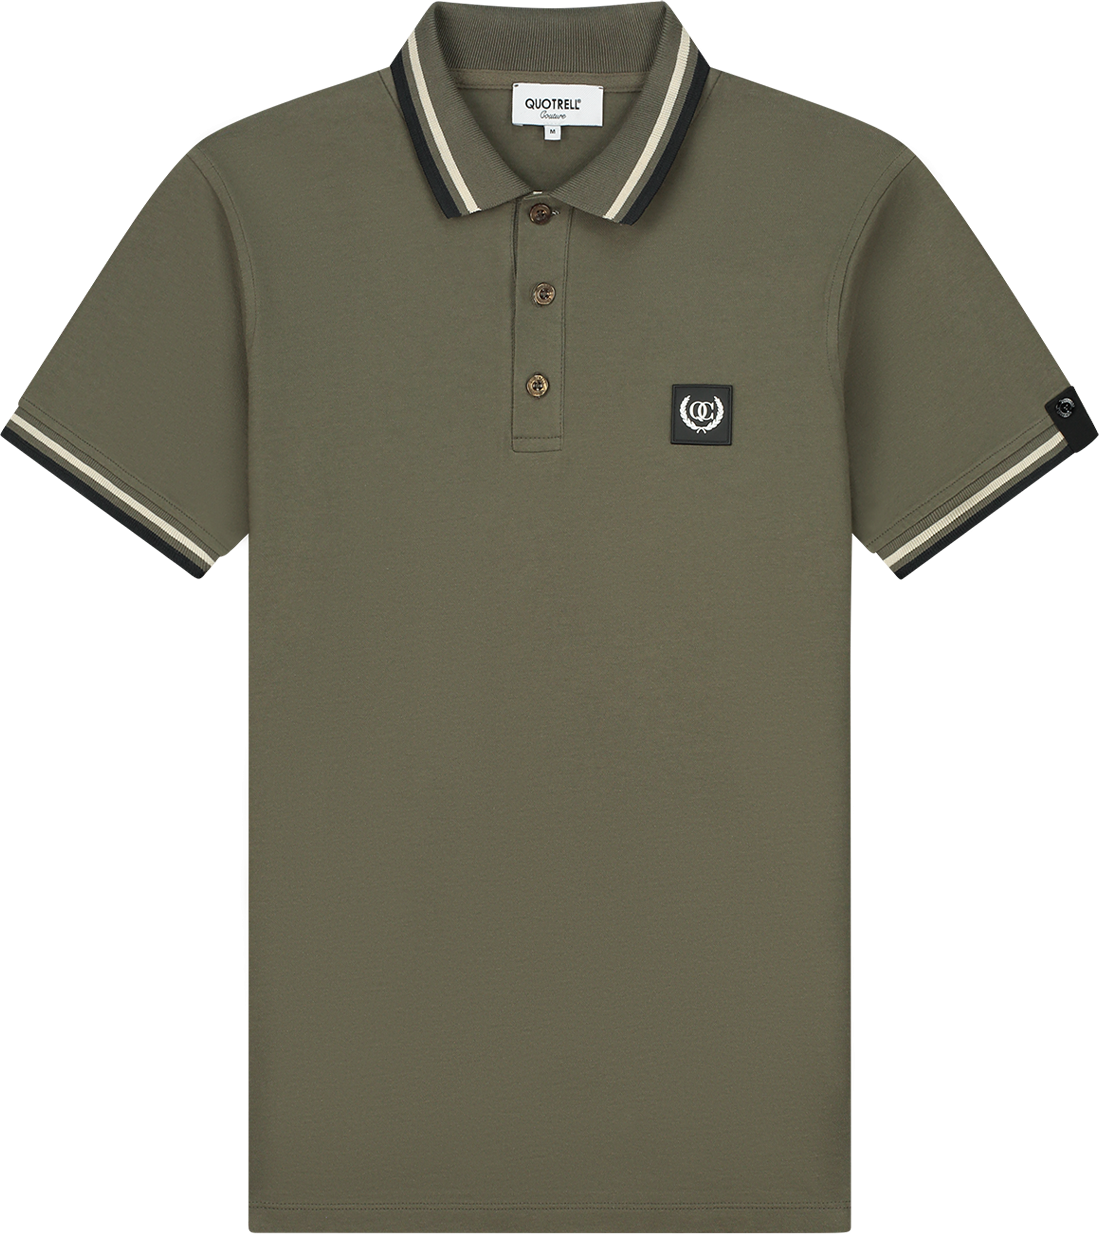 Quotrell Quotrell Couture - Avergne Polo | Army Green/black | MID ...